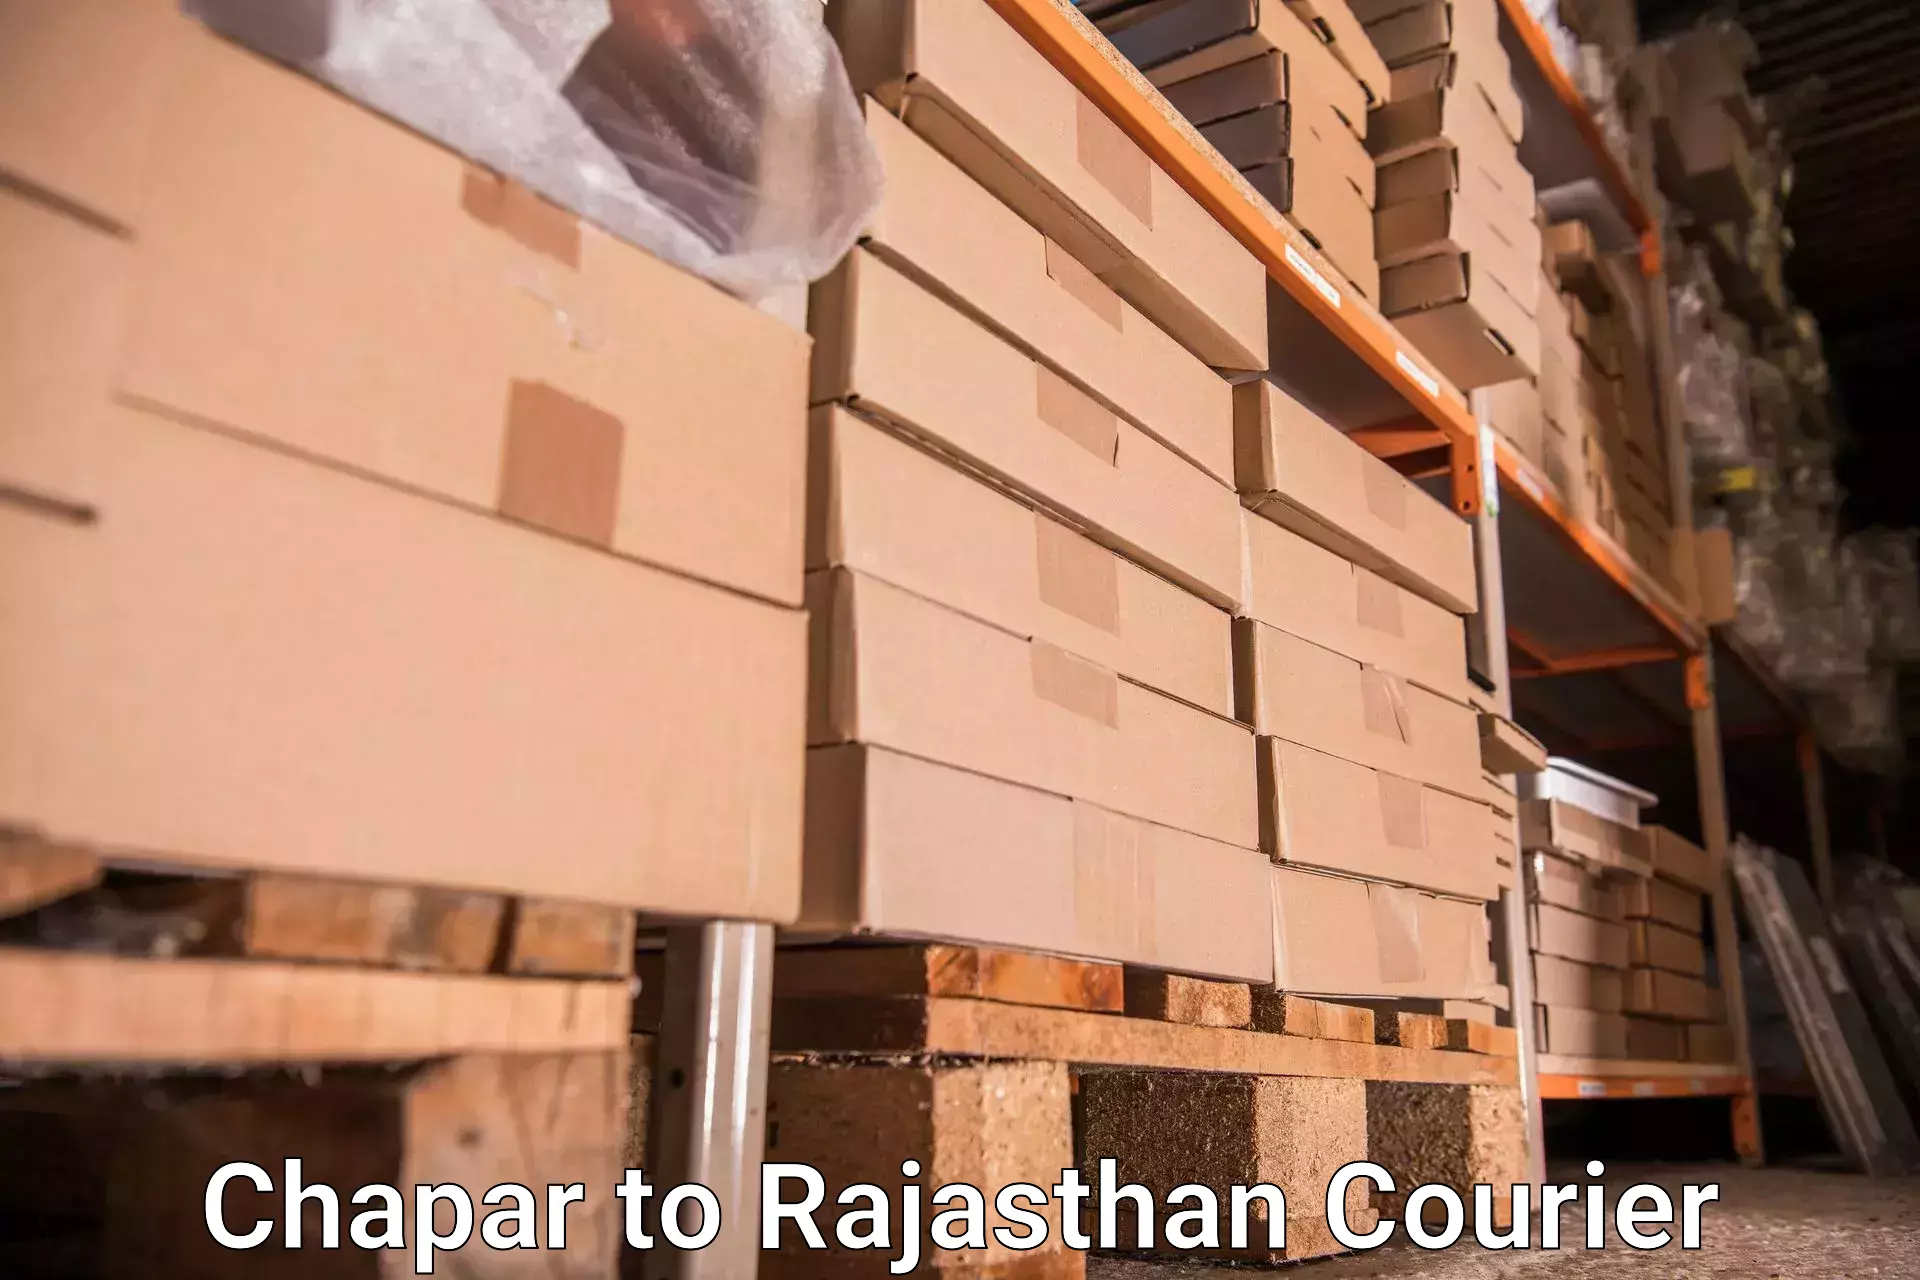 Baggage transport quote Chapar to Deogarh Rajsamand